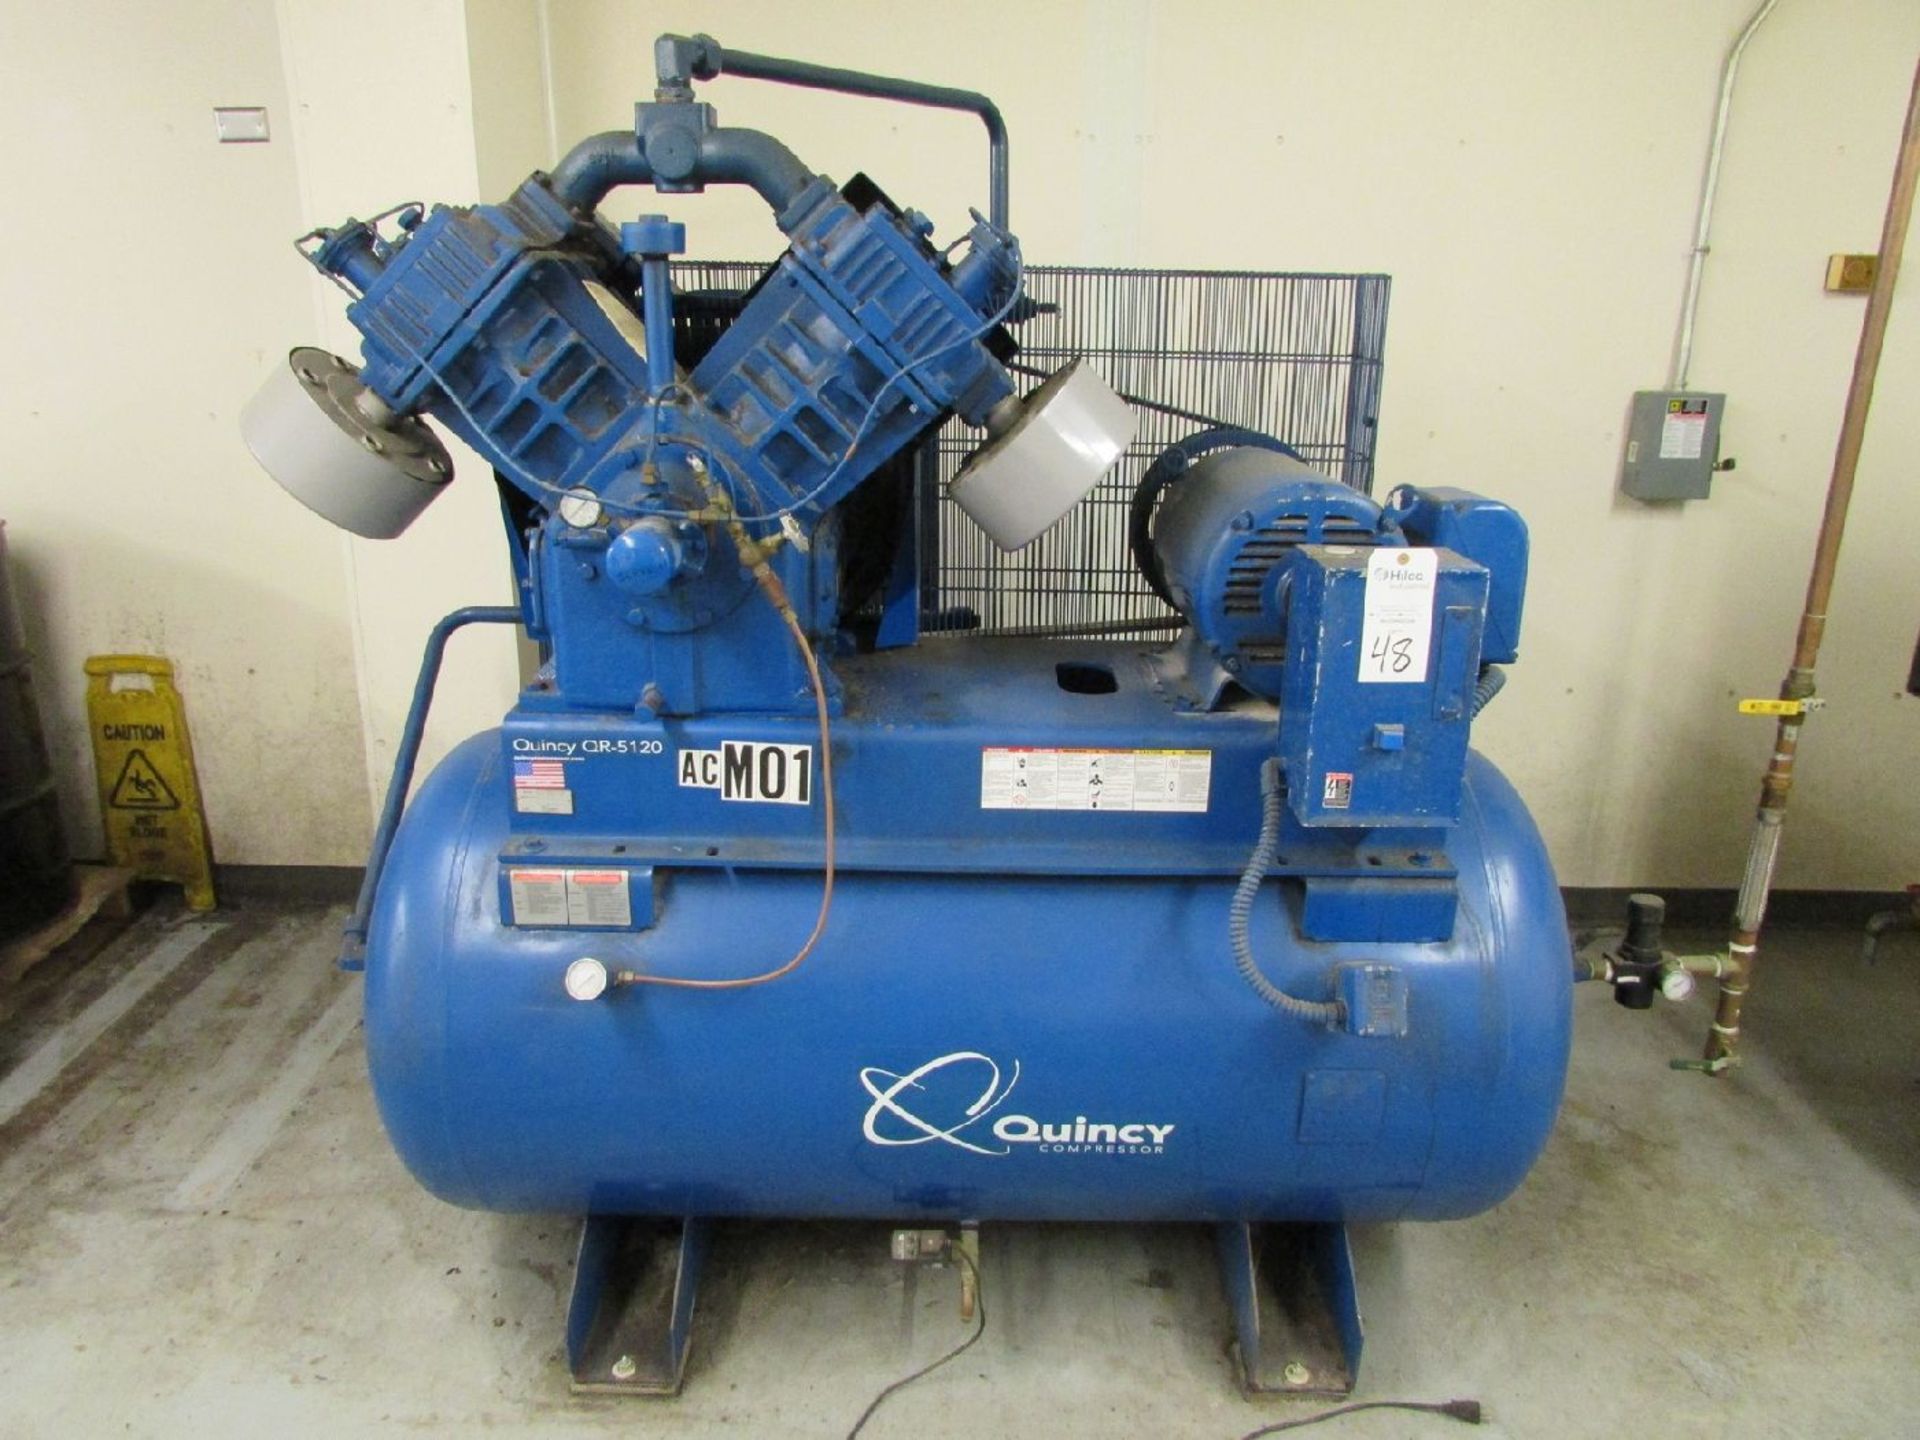 Quincy Model OR-5120 25hp Horizontal Tank Mounted Air Compressor